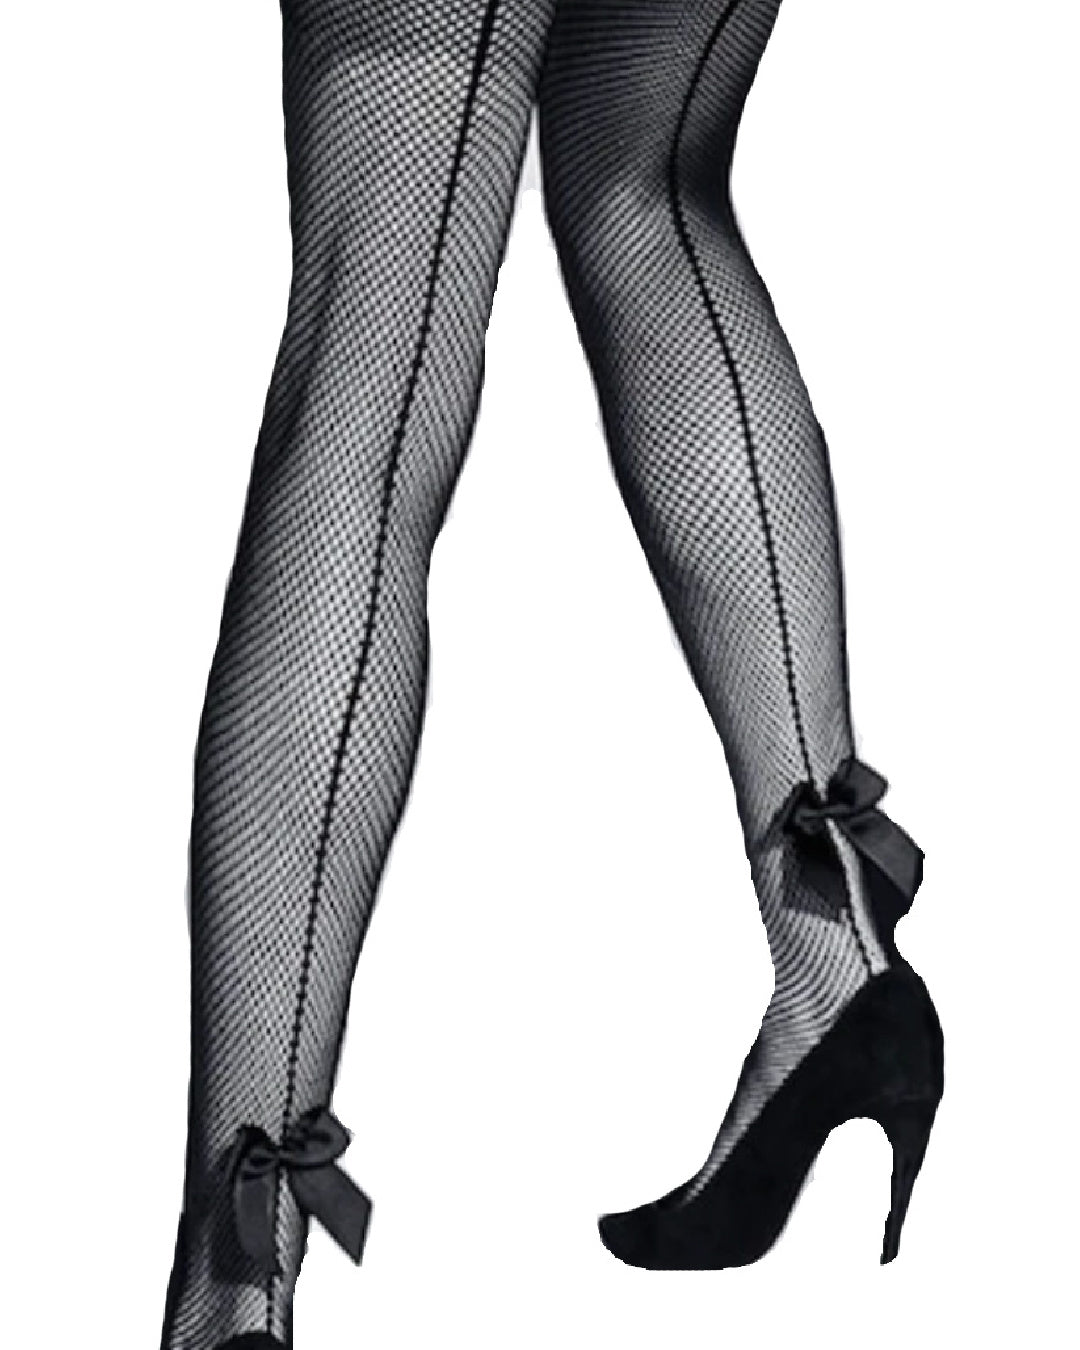 Elvgren- the 1940s Style Fishnet Pantyhose with Ankle Bows and Back Se –  Dorothea's Closet Vintage